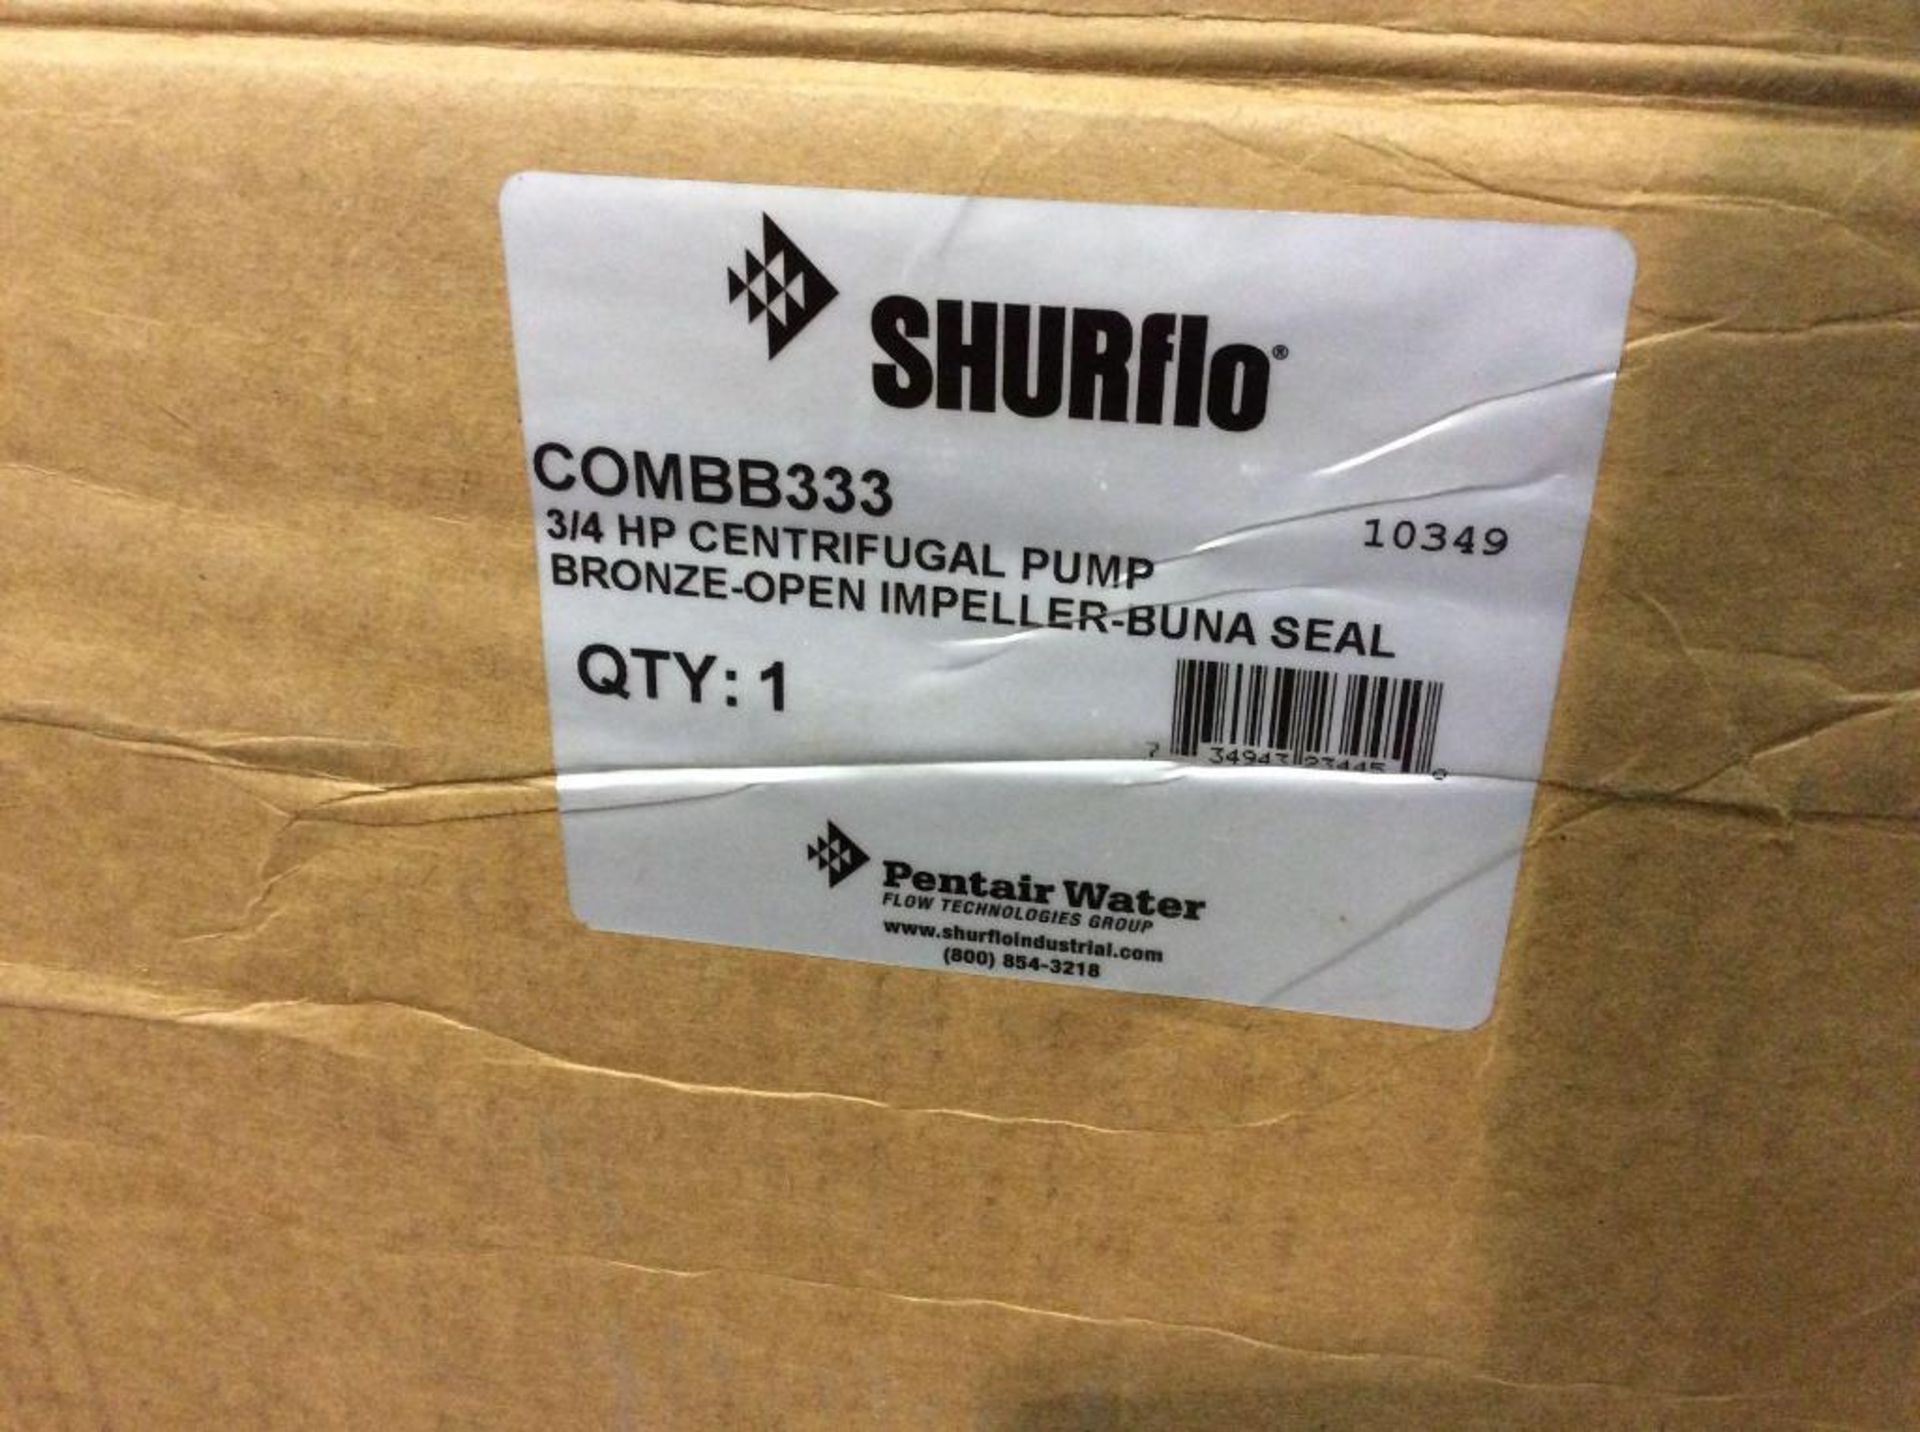 Lot of (2) Shurflo close-coupled centrifugal pumps, 3/4 hp, bronze open impellar, (NEW IN BOXES) - Image 2 of 2